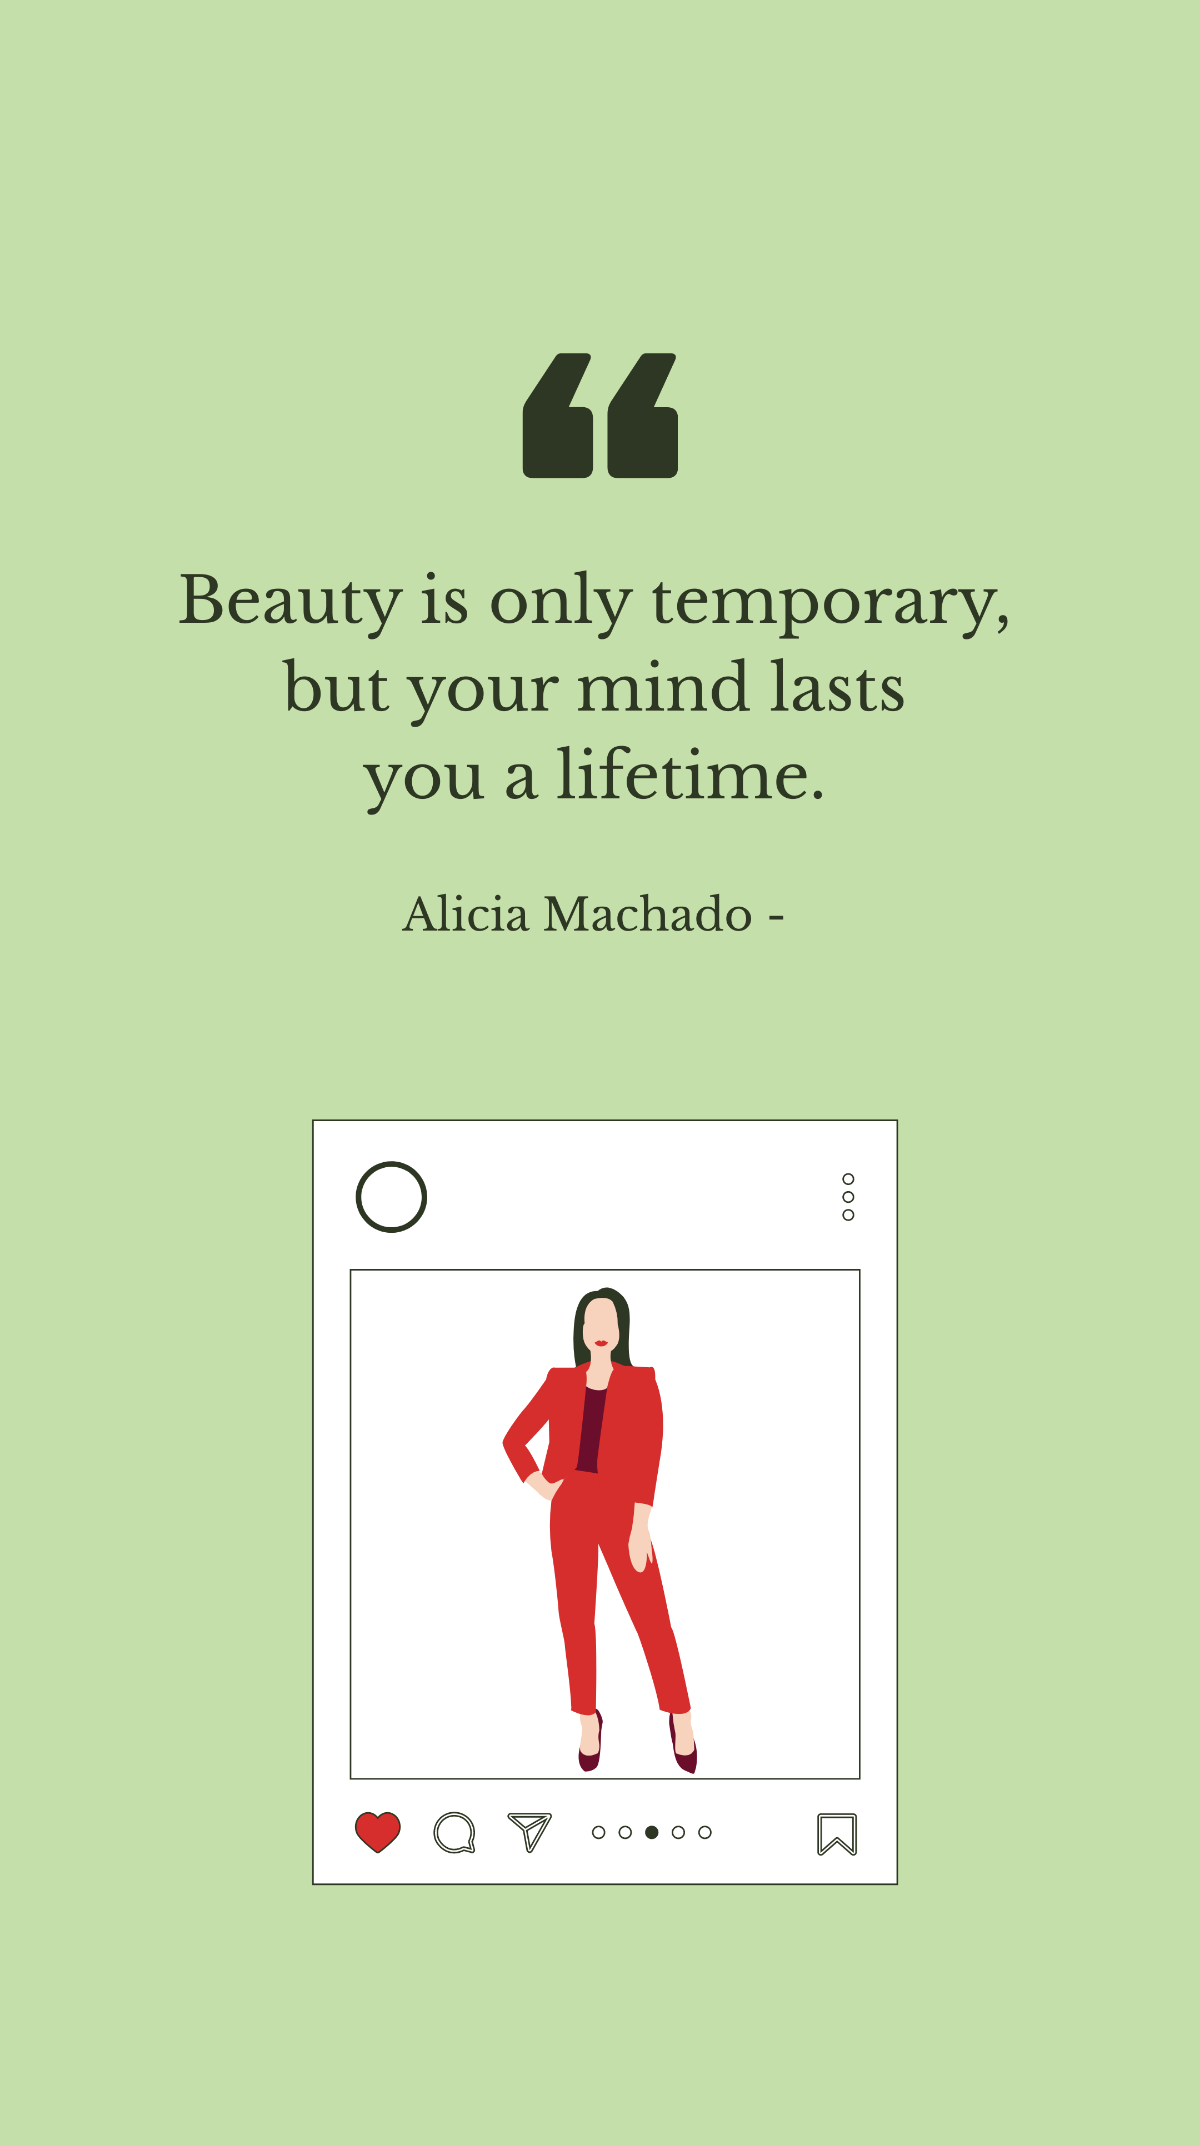 Alicia Machado - Beauty is only temporary, but your mind lasts you a lifetime.